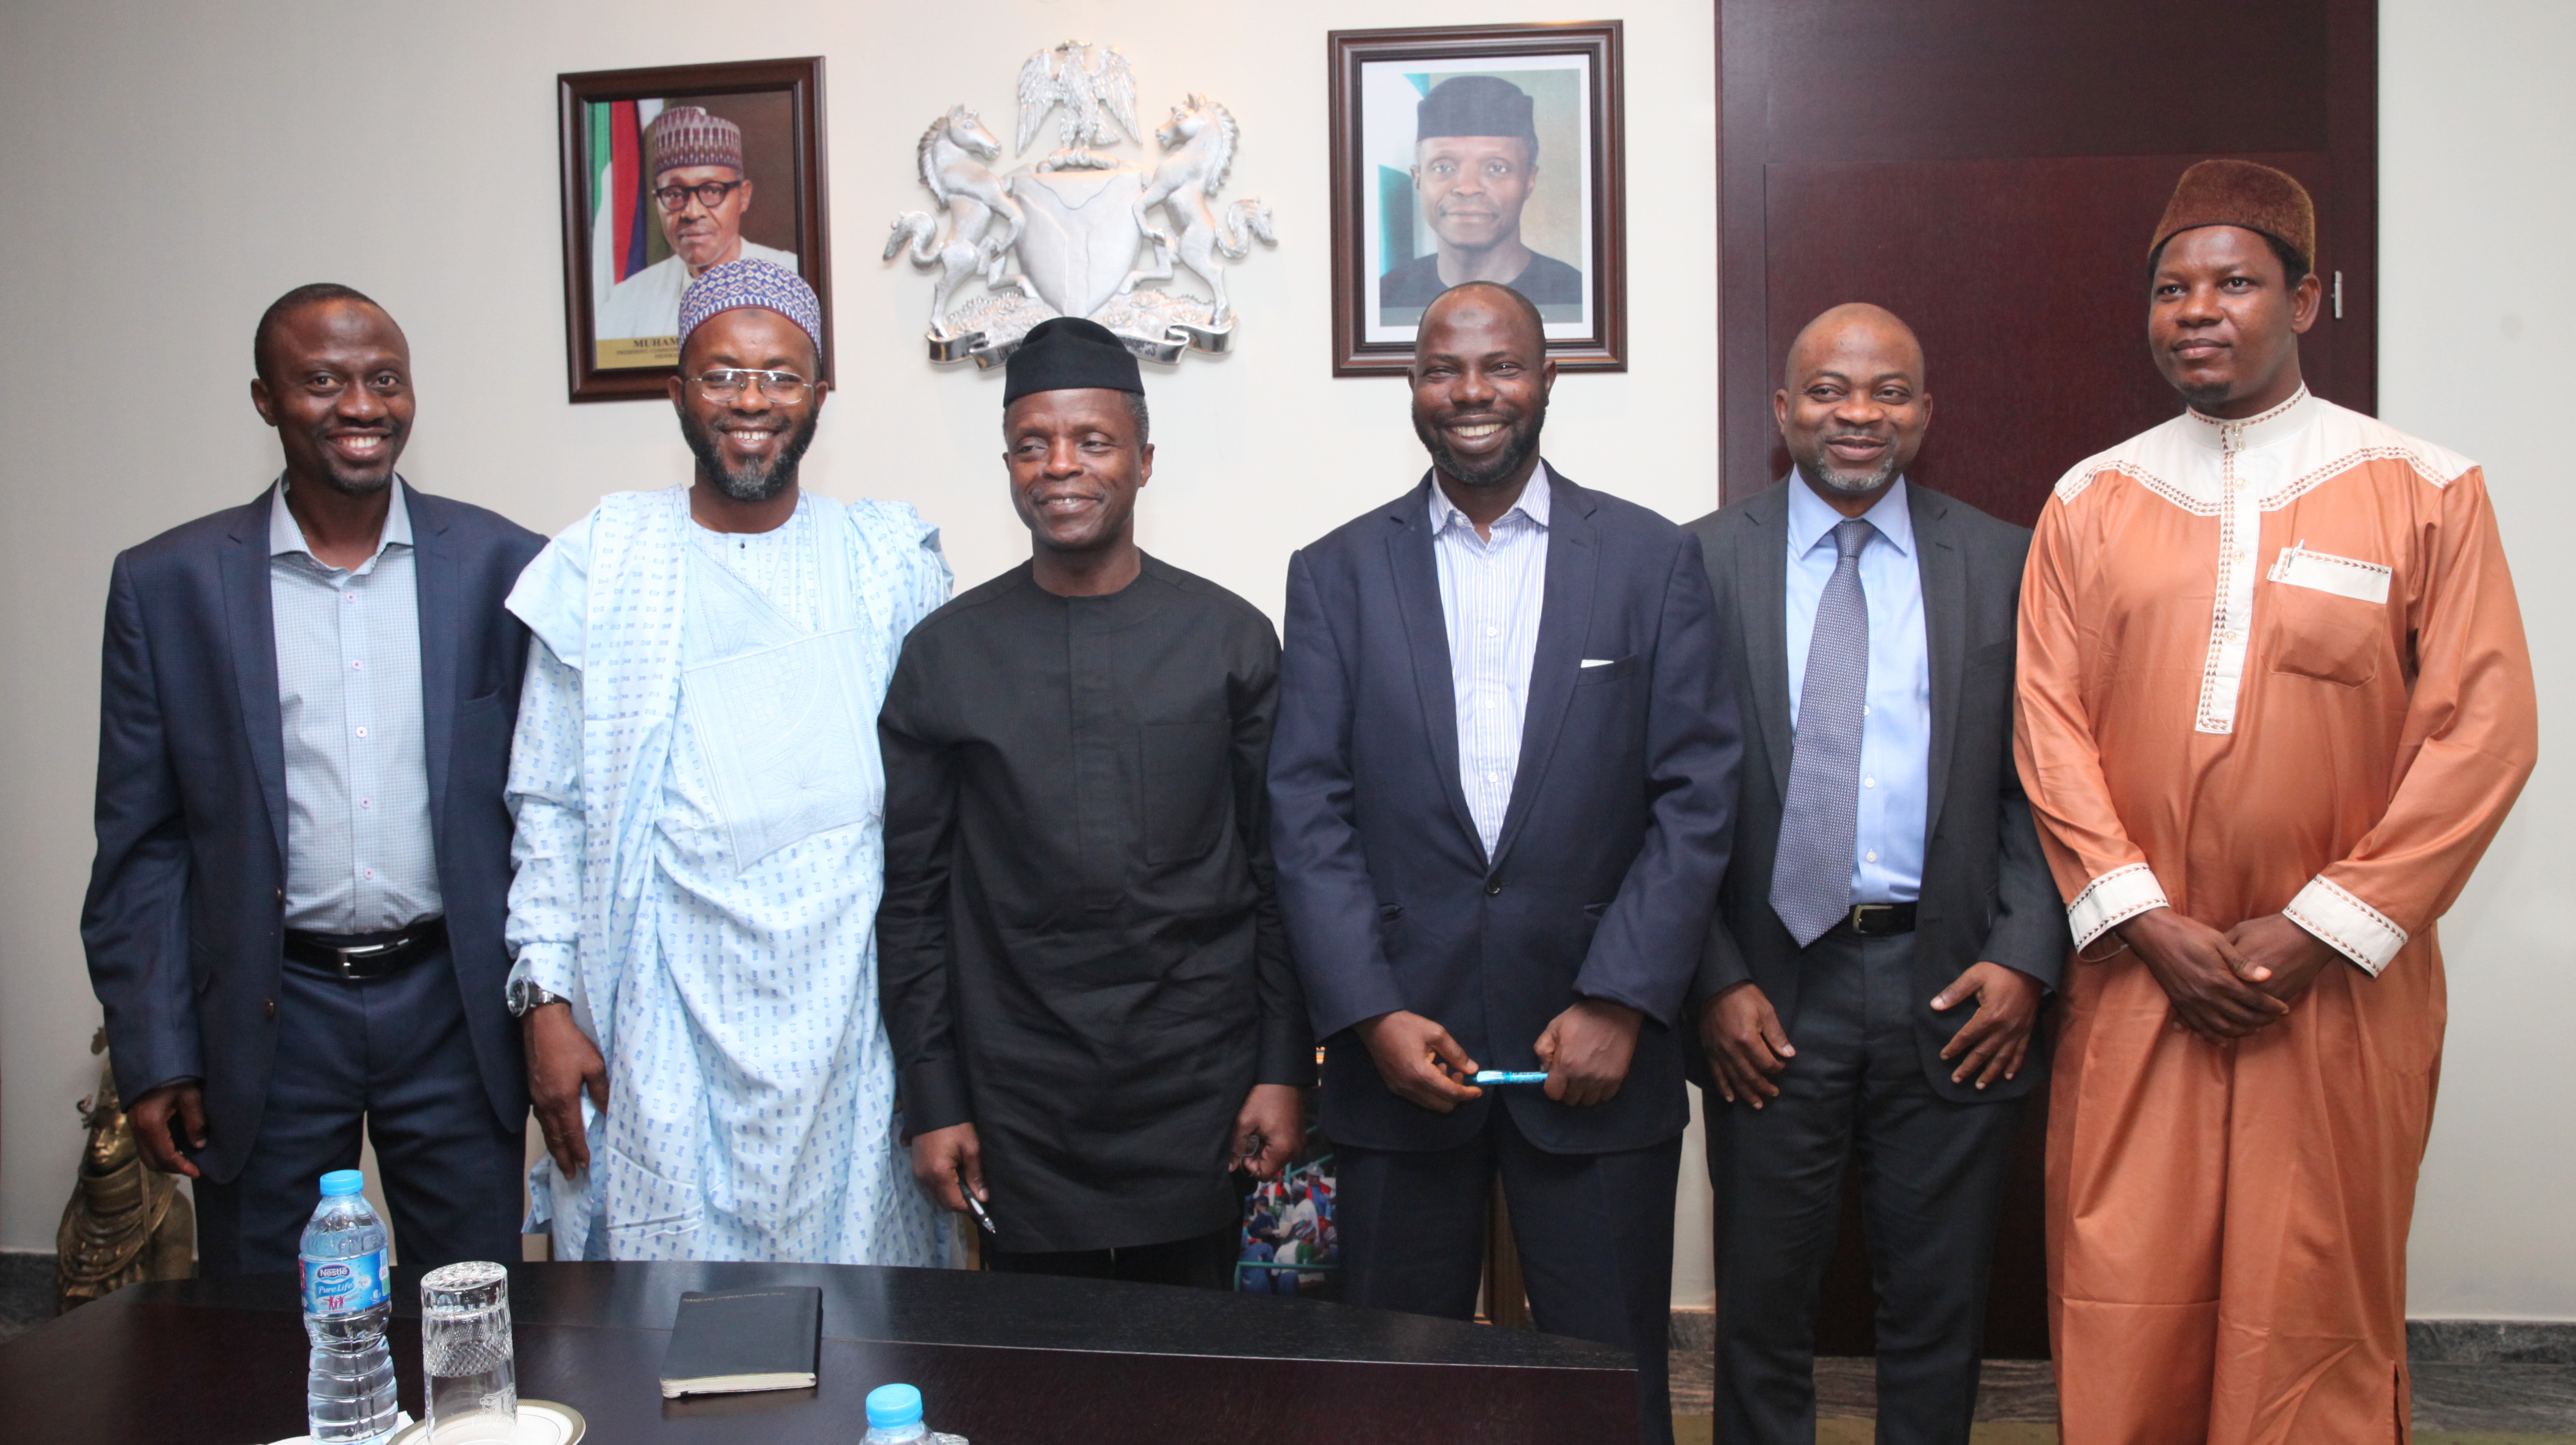 VP Osinbajo Meets The Muslim Congress At The State House On 04/02/2016